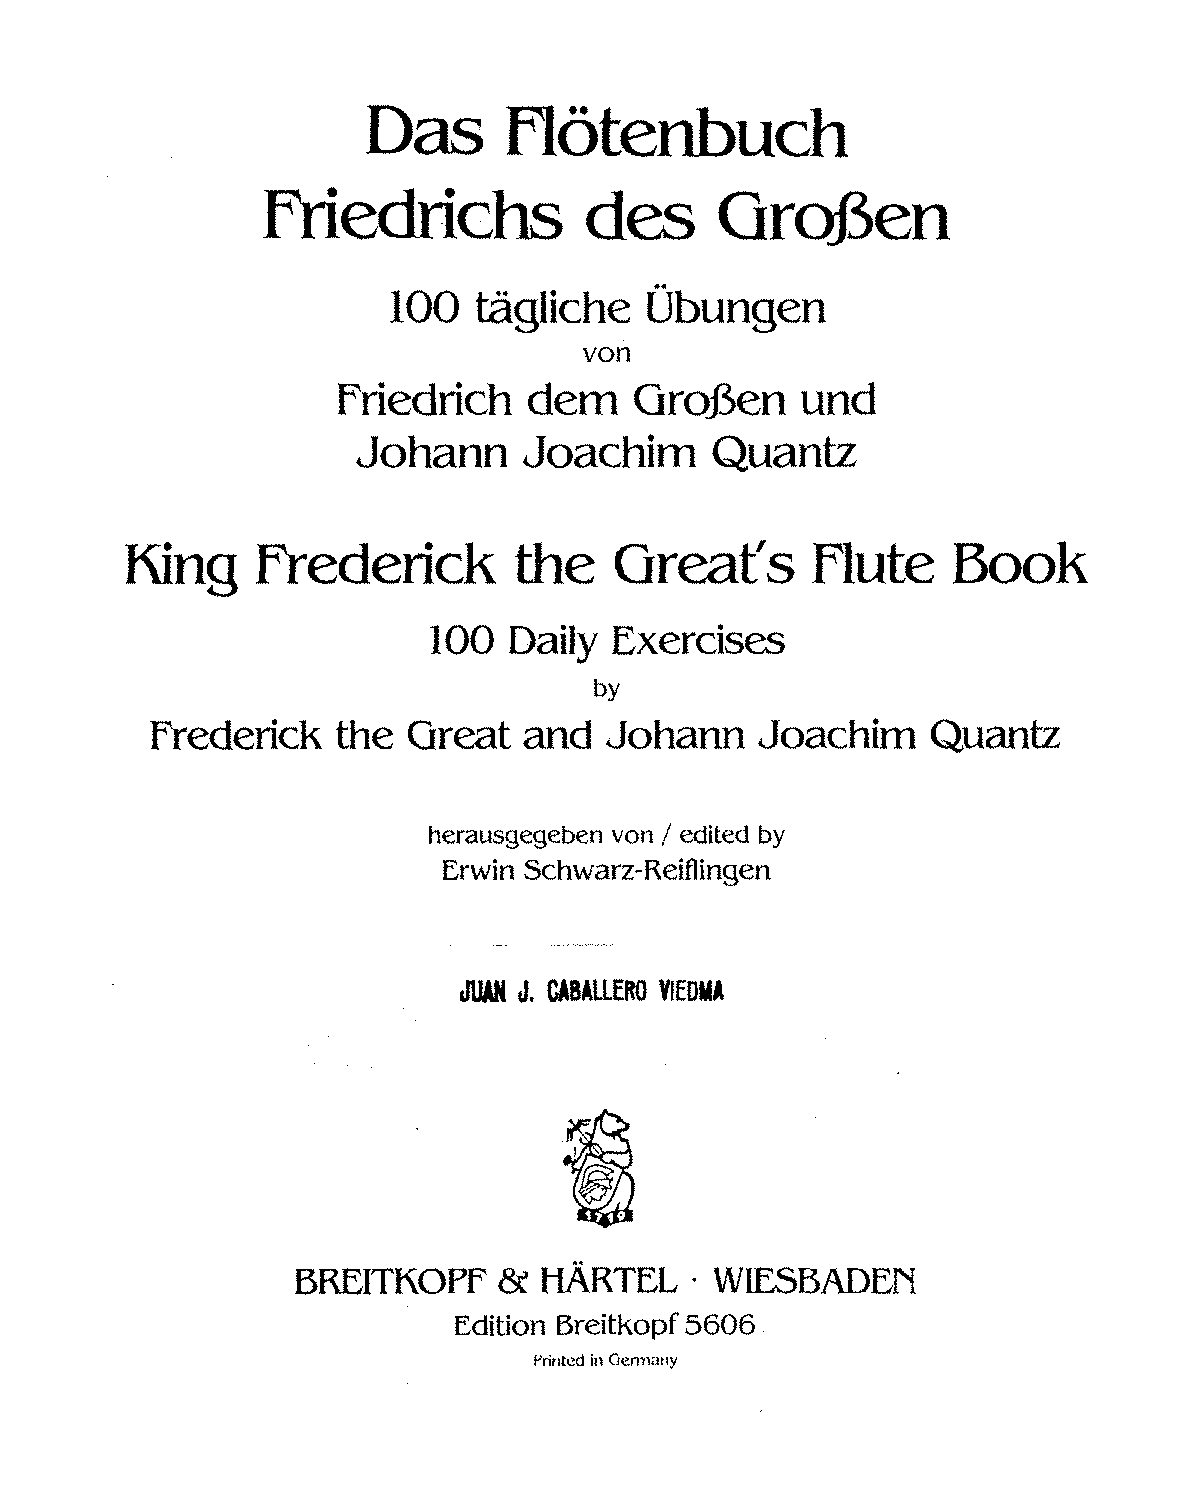 Flute Book Frederick the Great (II) 100 Daily Exercises